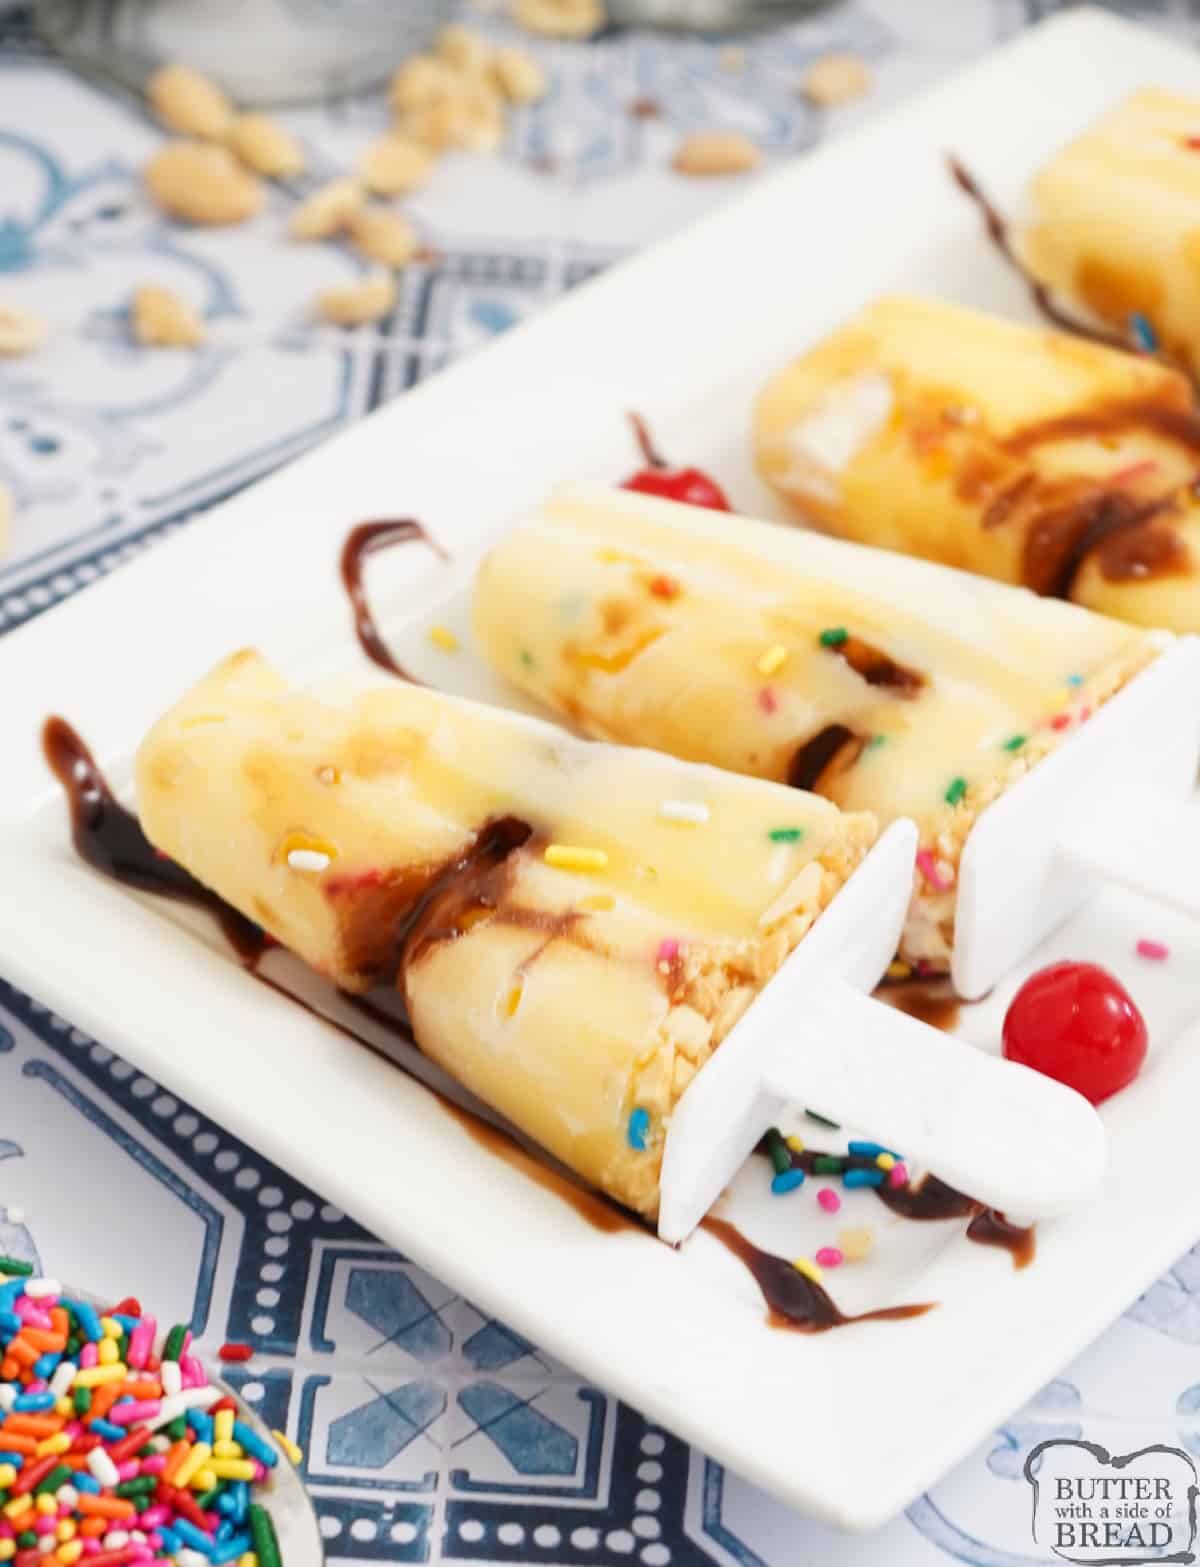 Hot Fudge Sundae Pudding Pops are made with vanilla pudding, hot fudge, sprinkles and peanuts. Layer the ingredients in a popsicle mold for a delicious frozen treat!